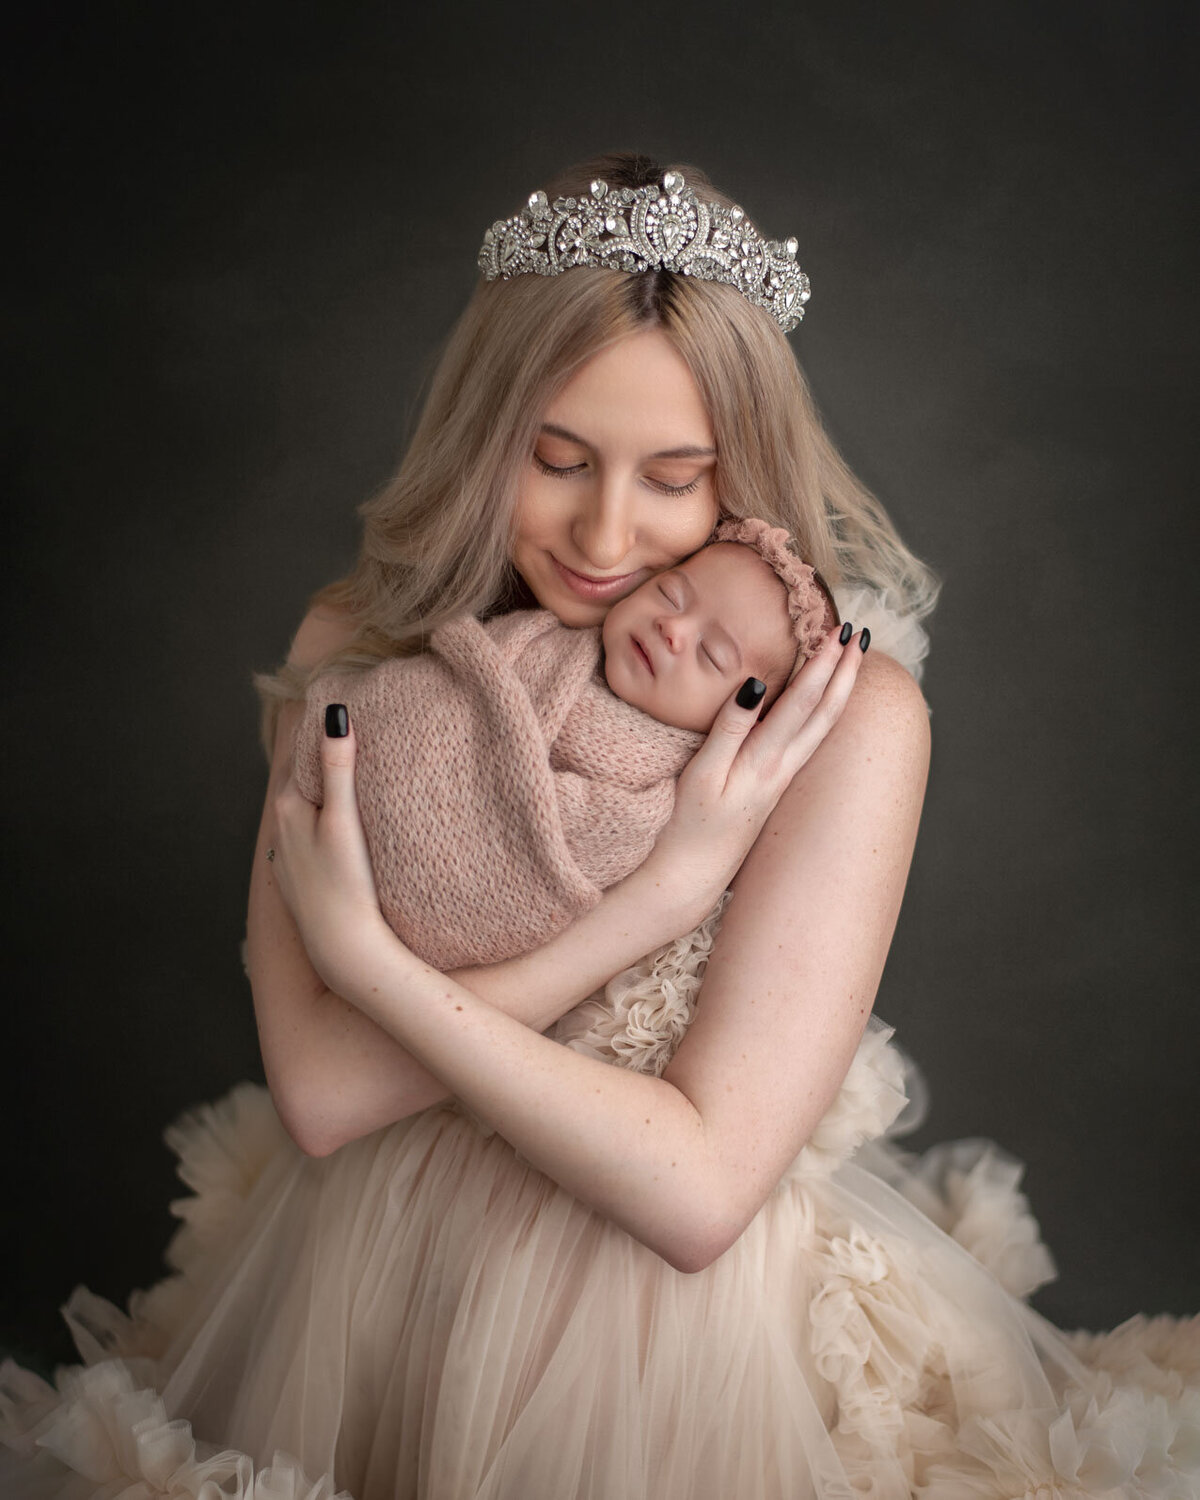 mom in gown with tiara snuggling her newborn daughter